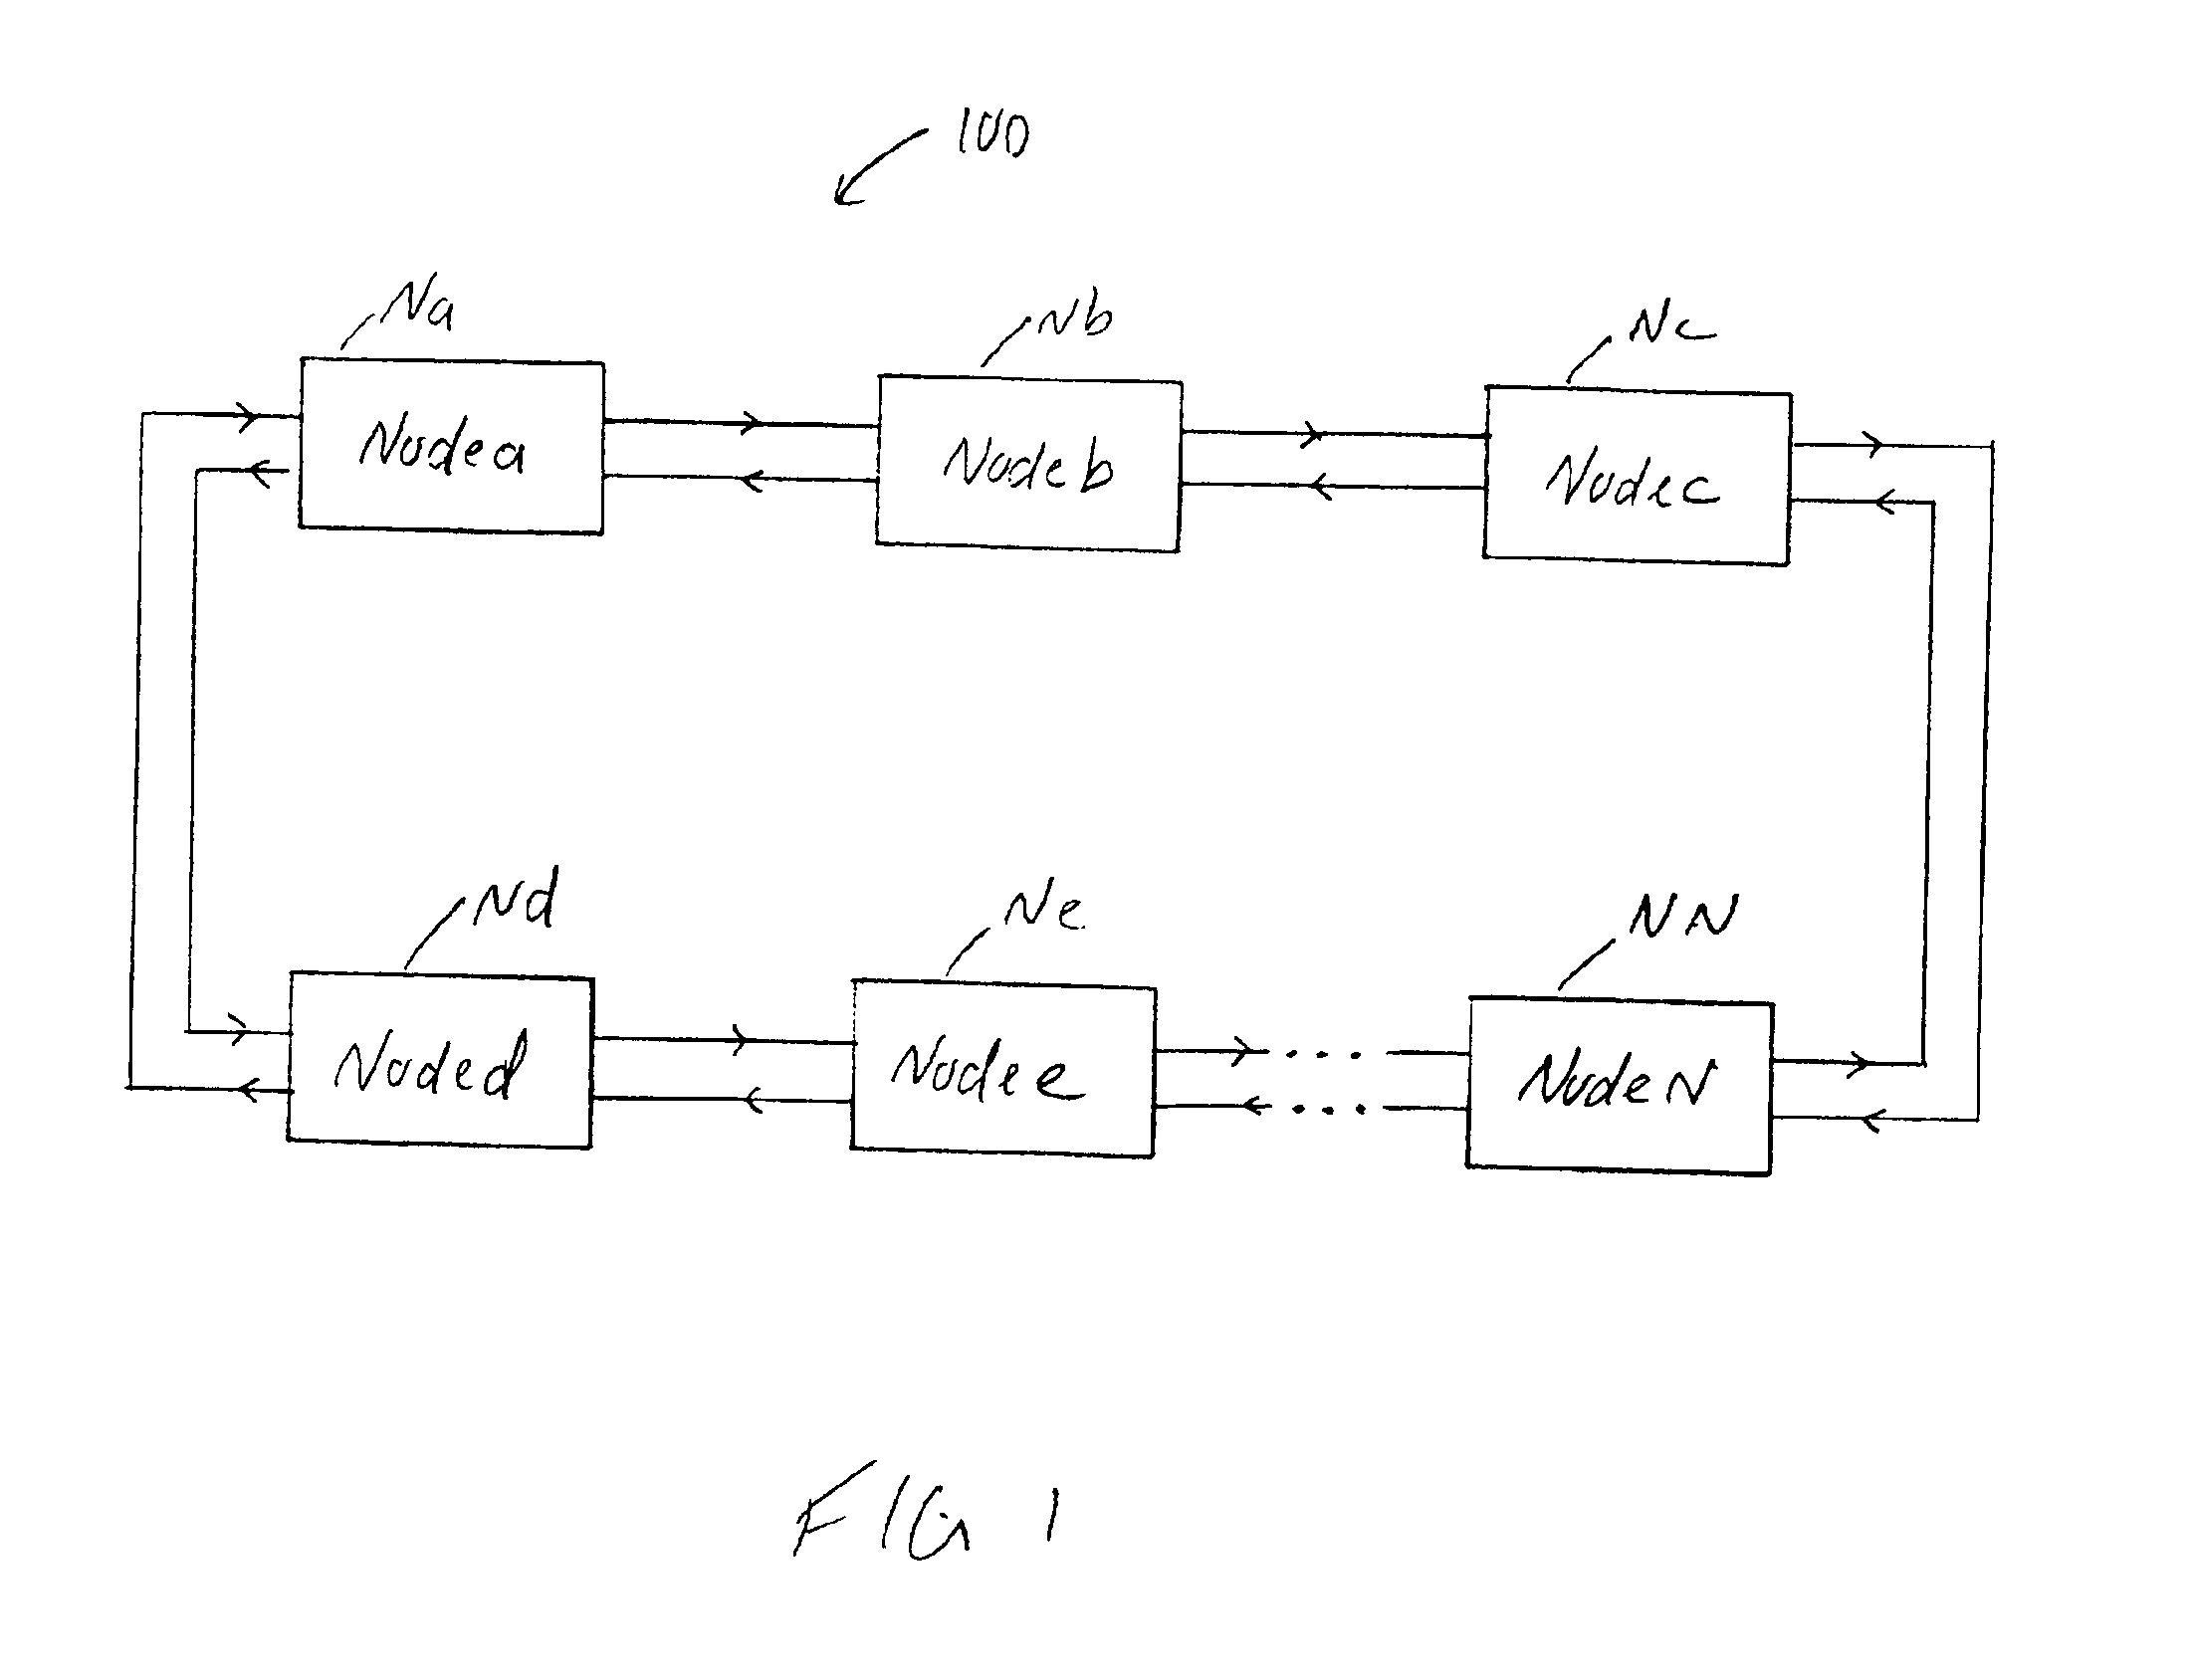 MAC protocol for optical packet-switched ring network